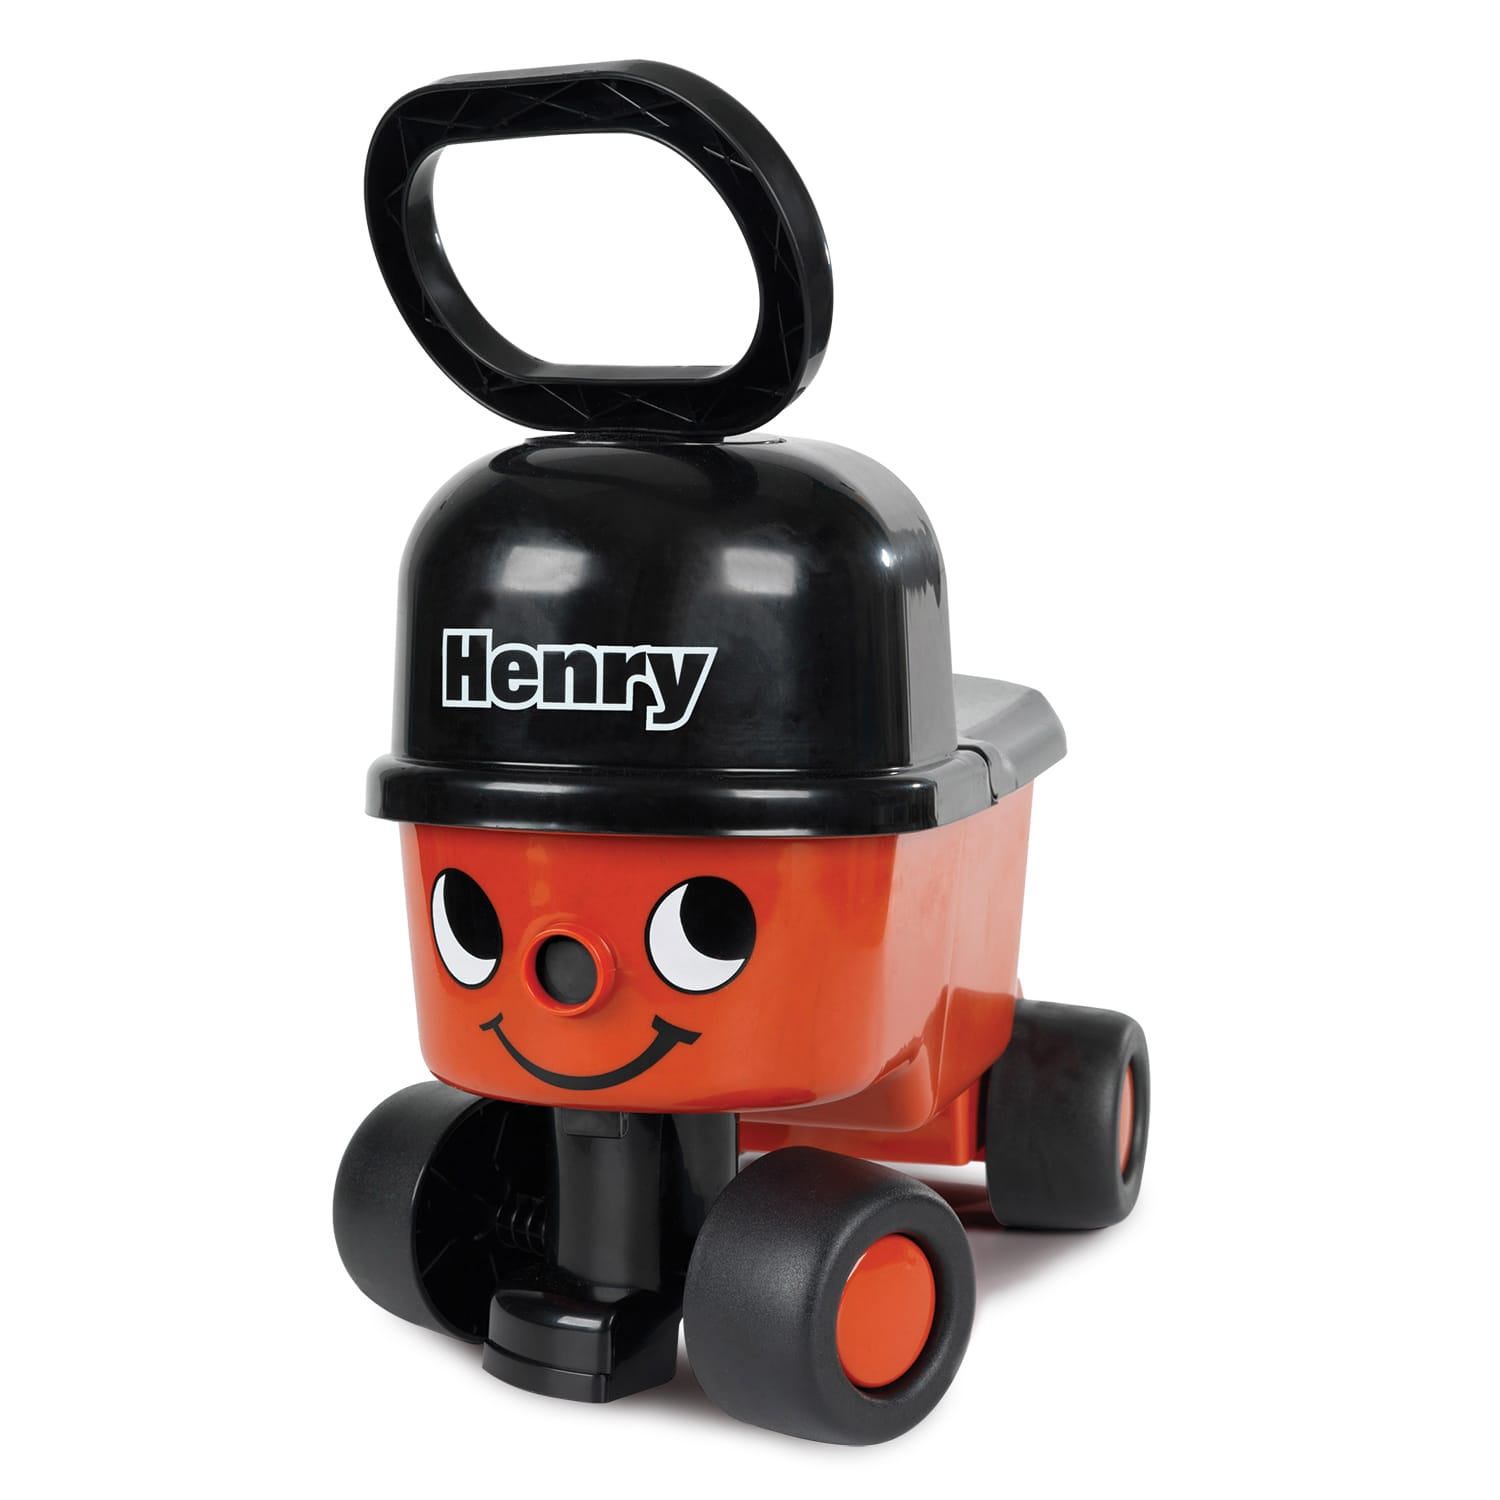 CASDON Little Driver Henry Sit and Ride Toy